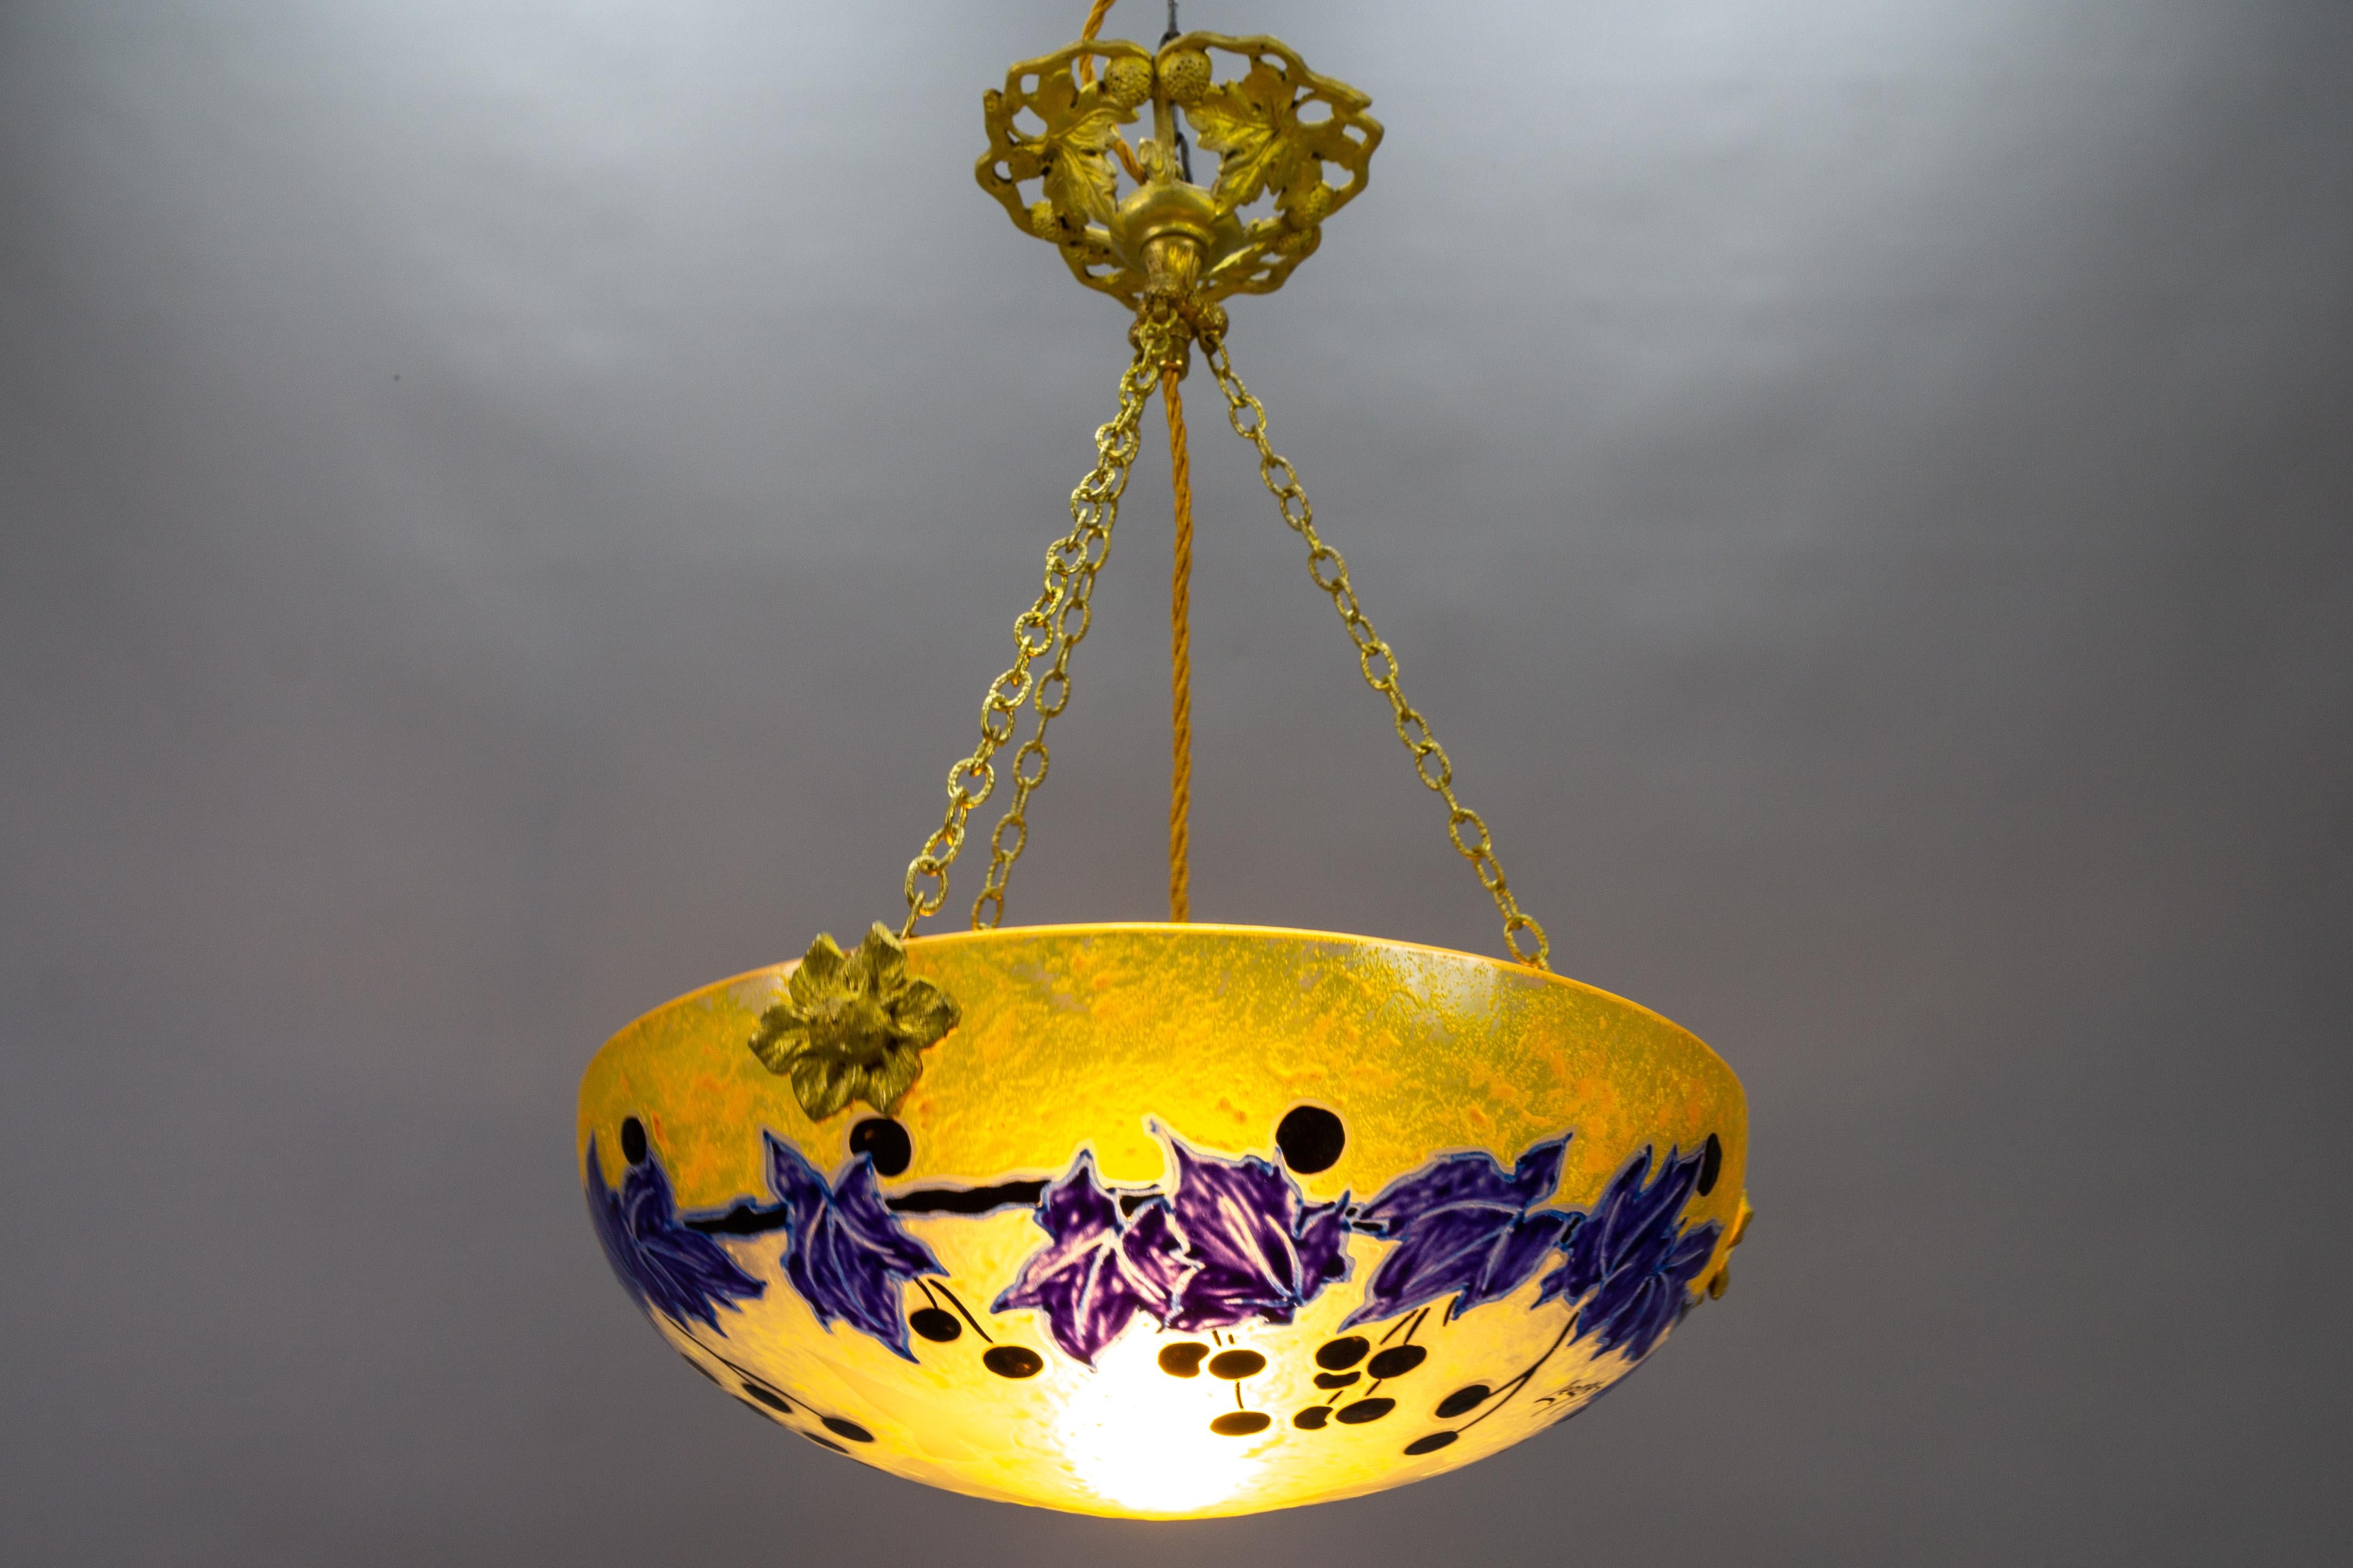 French Art Nouveau Pendant Light with Yellow and Blue Glass Ivy Motifs by Legras For Sale 3